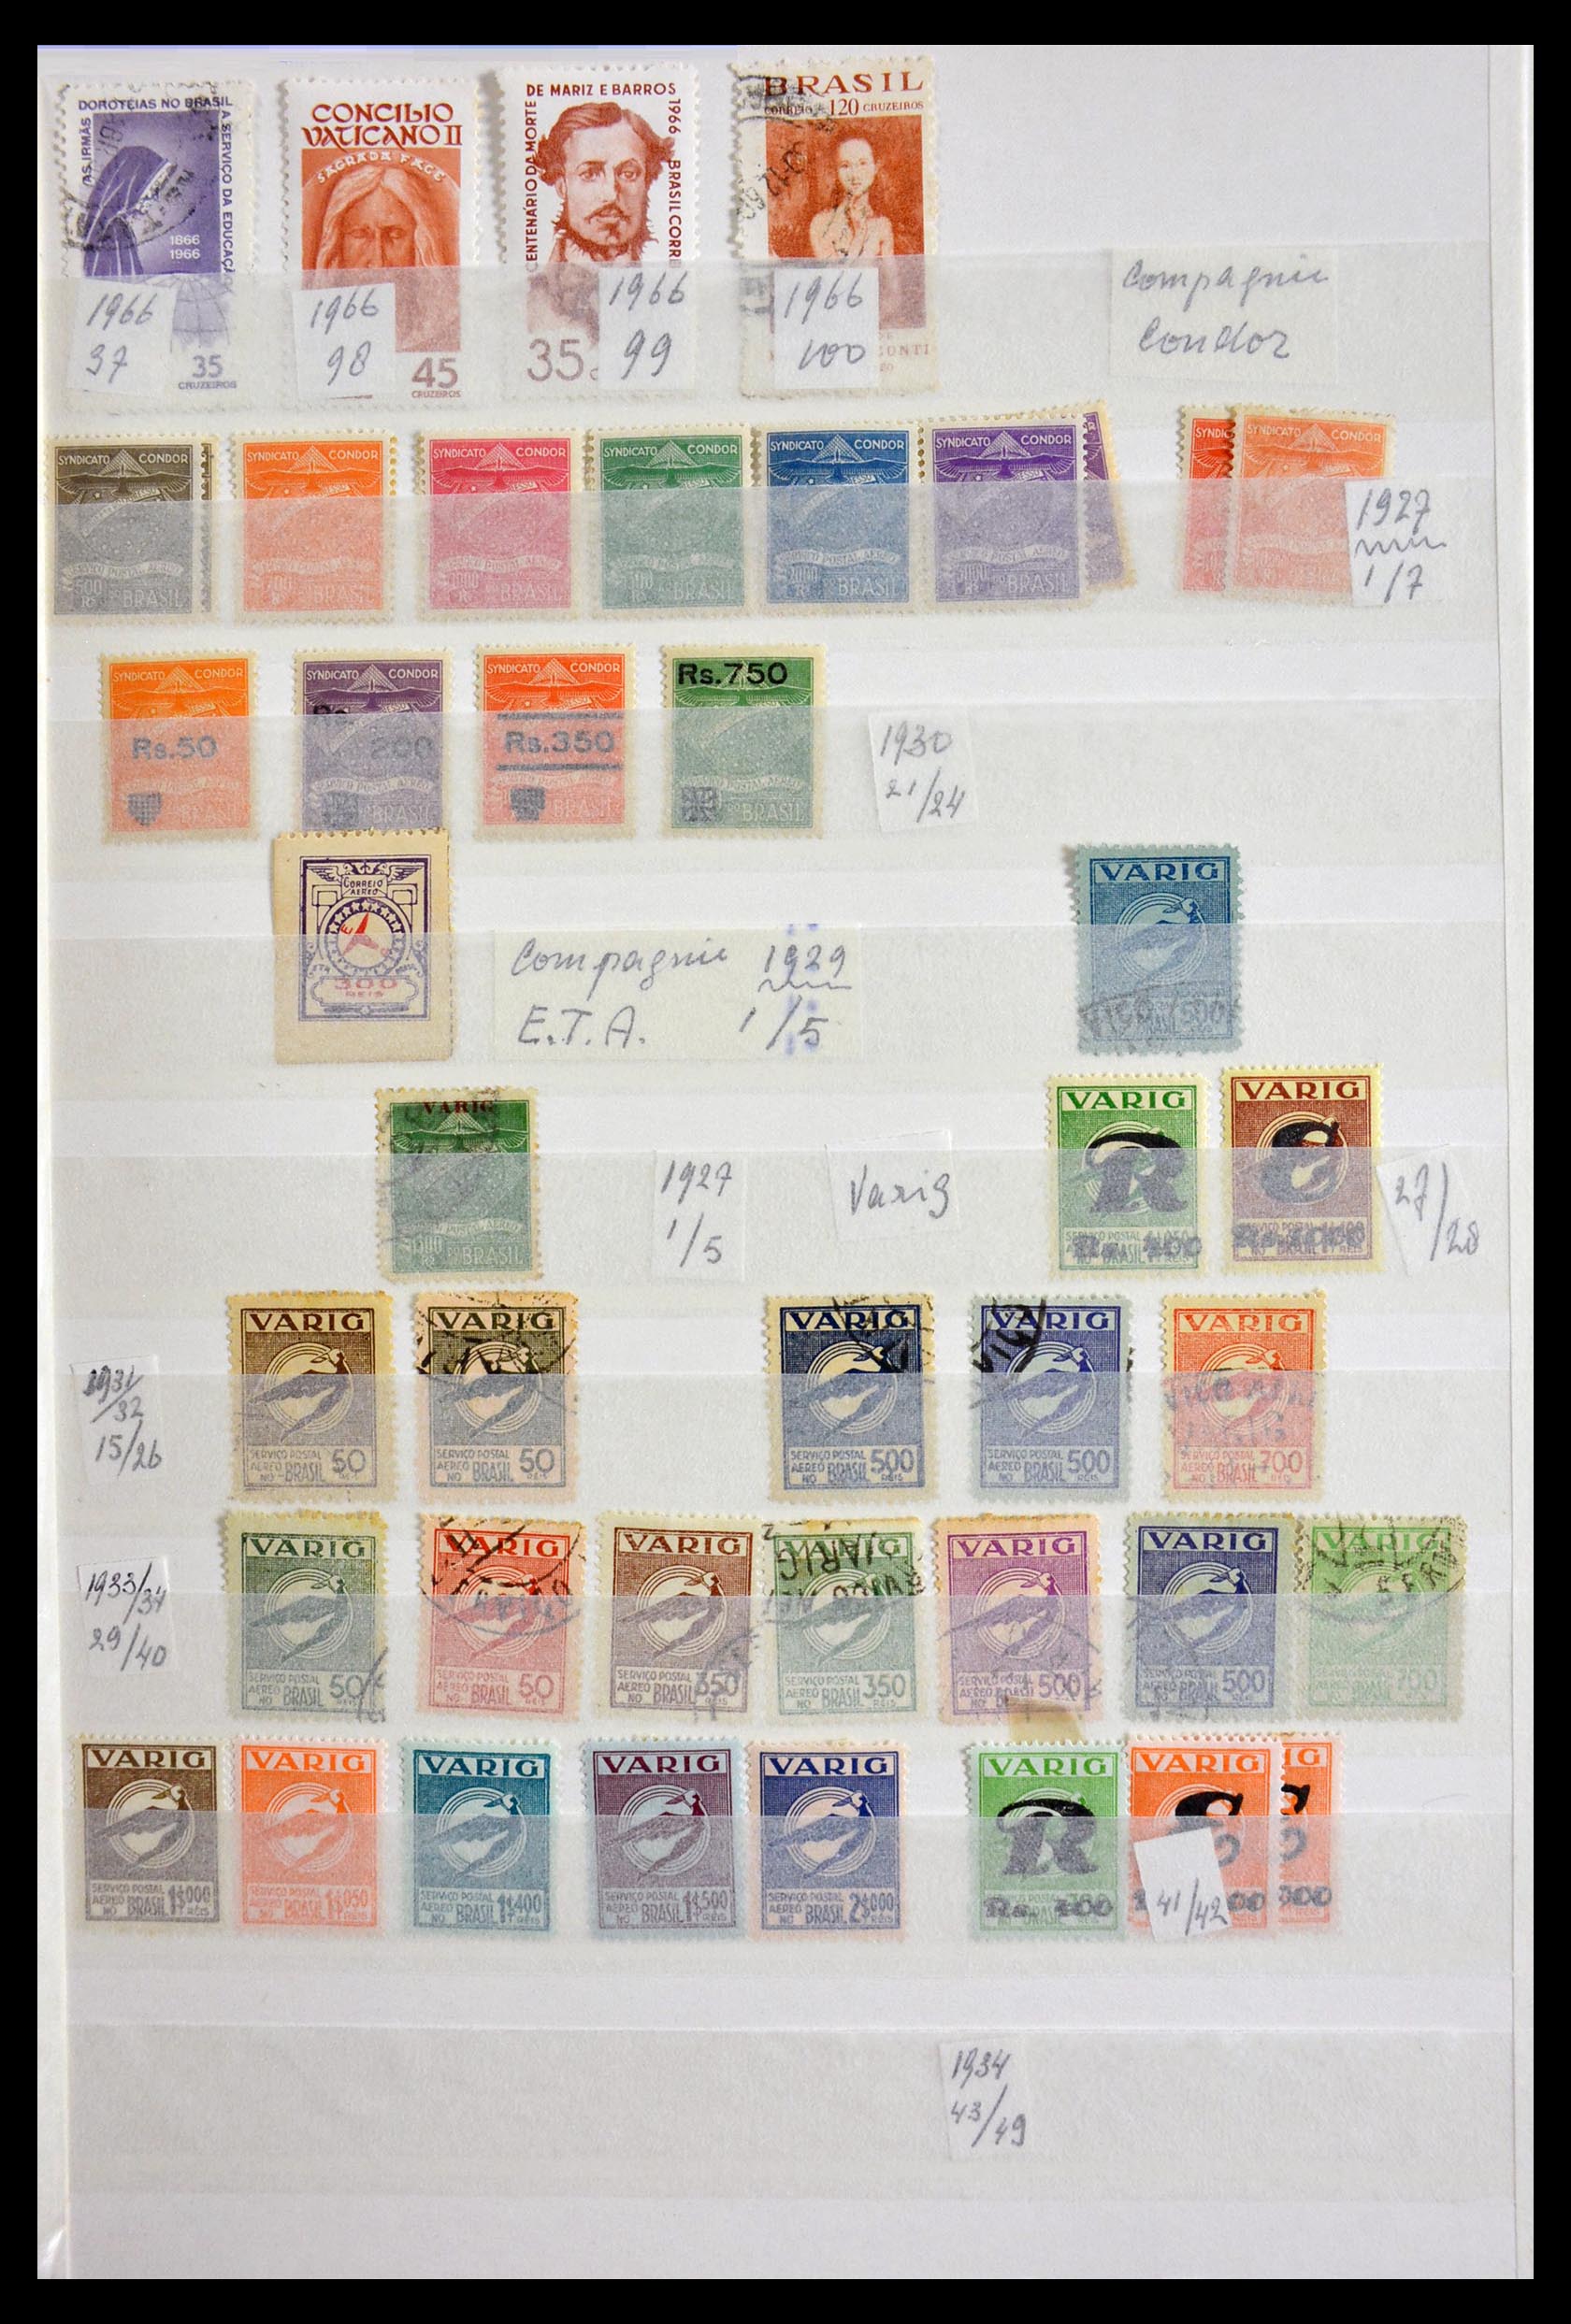 29917 029 - 29917 Latin America airmail stamps.